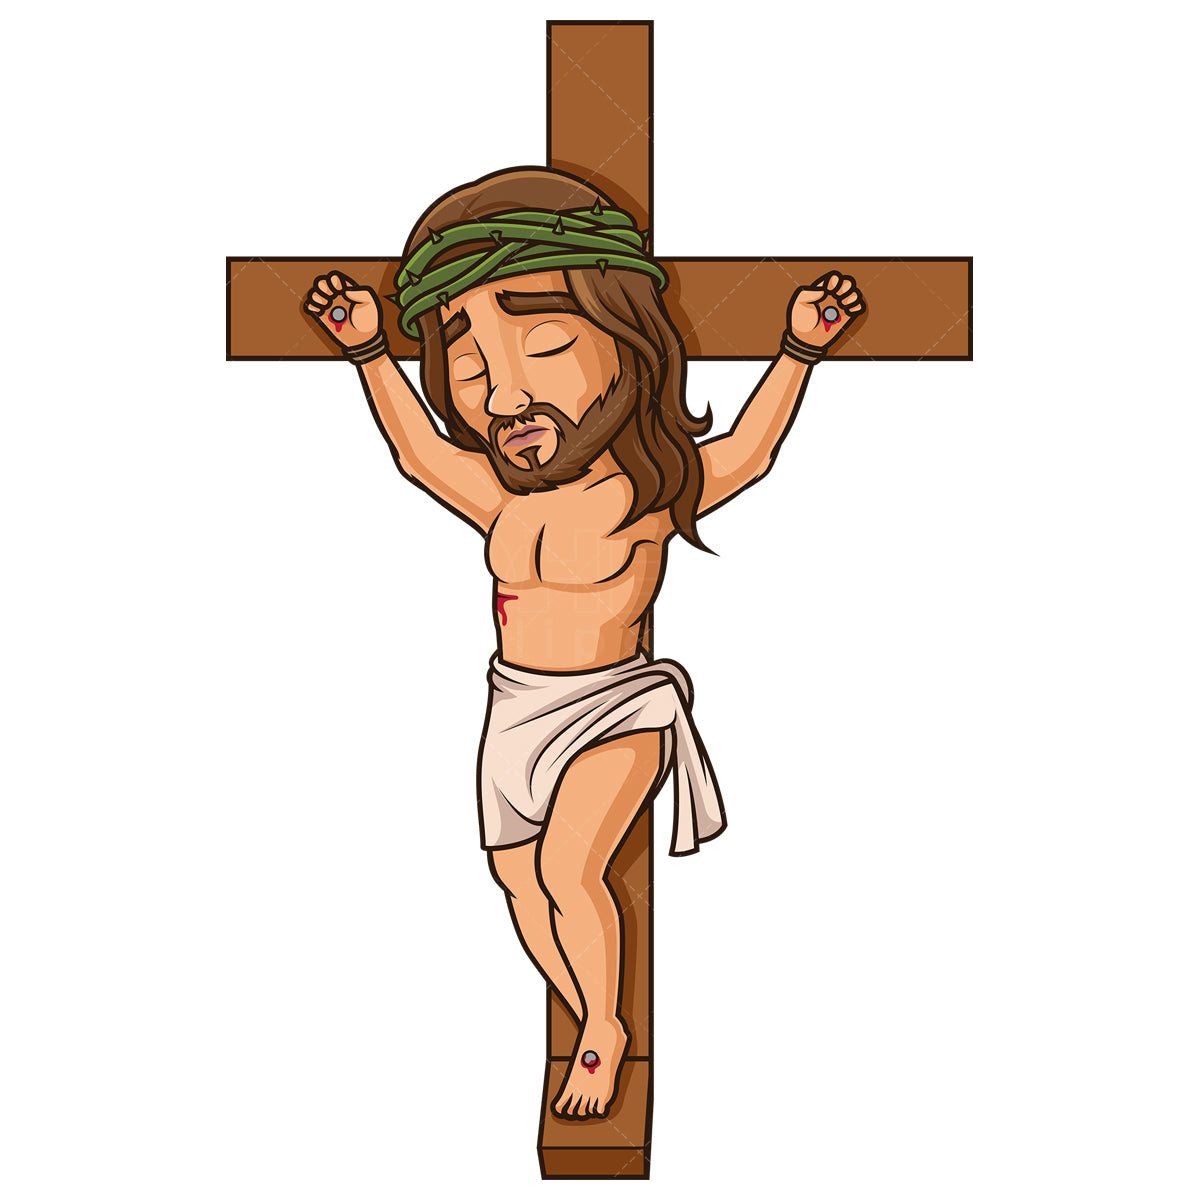 Royalty-free stock vector illustration of  jesus christ dying on the cross.